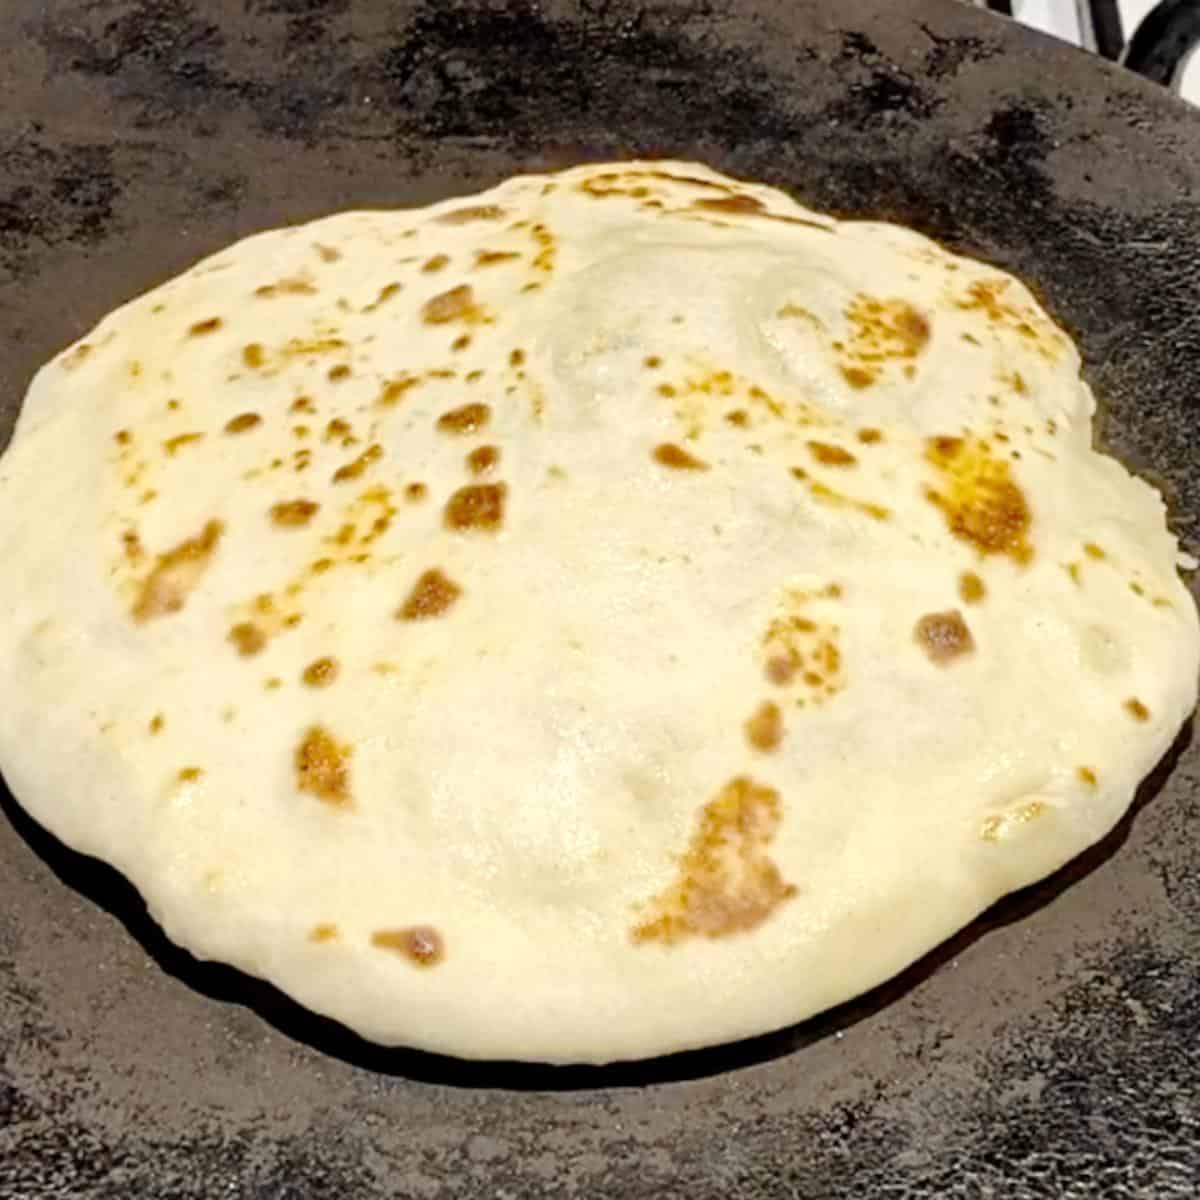 A skillet with flatbread.